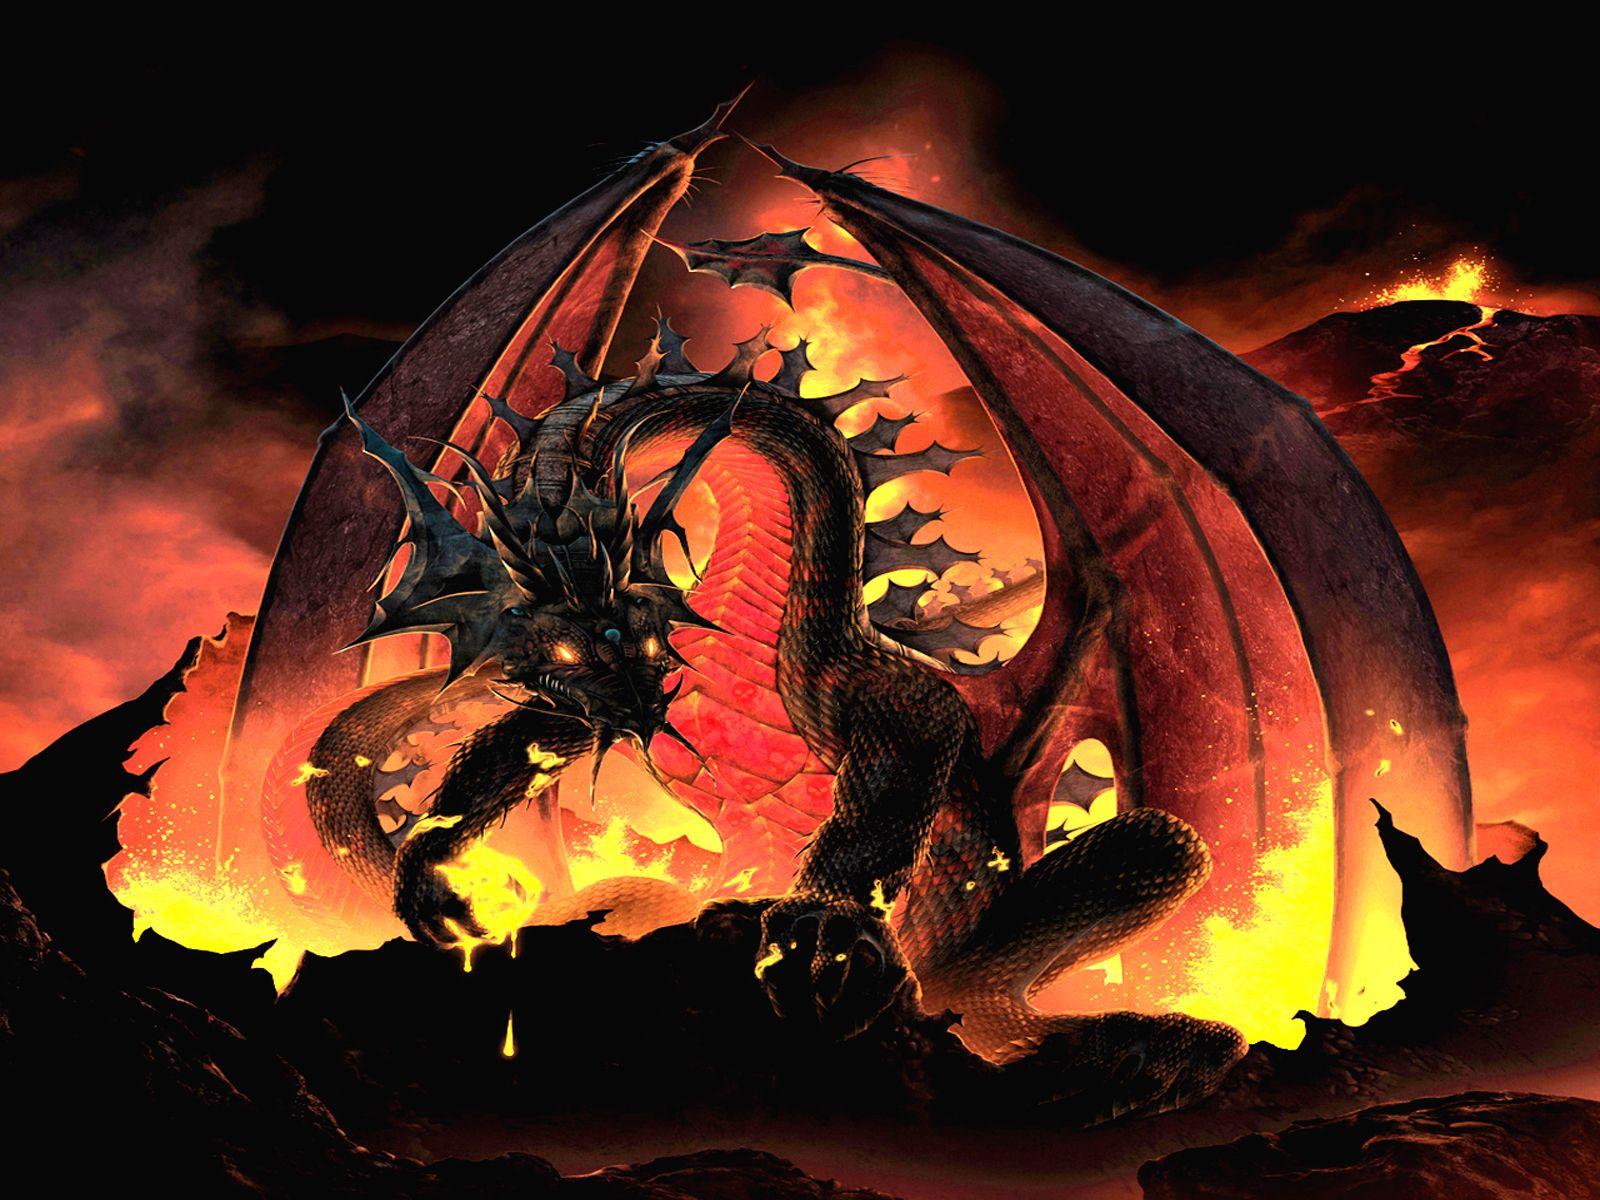 A dragon's heart burns fiercely, even in the face of evil.” ― S.G